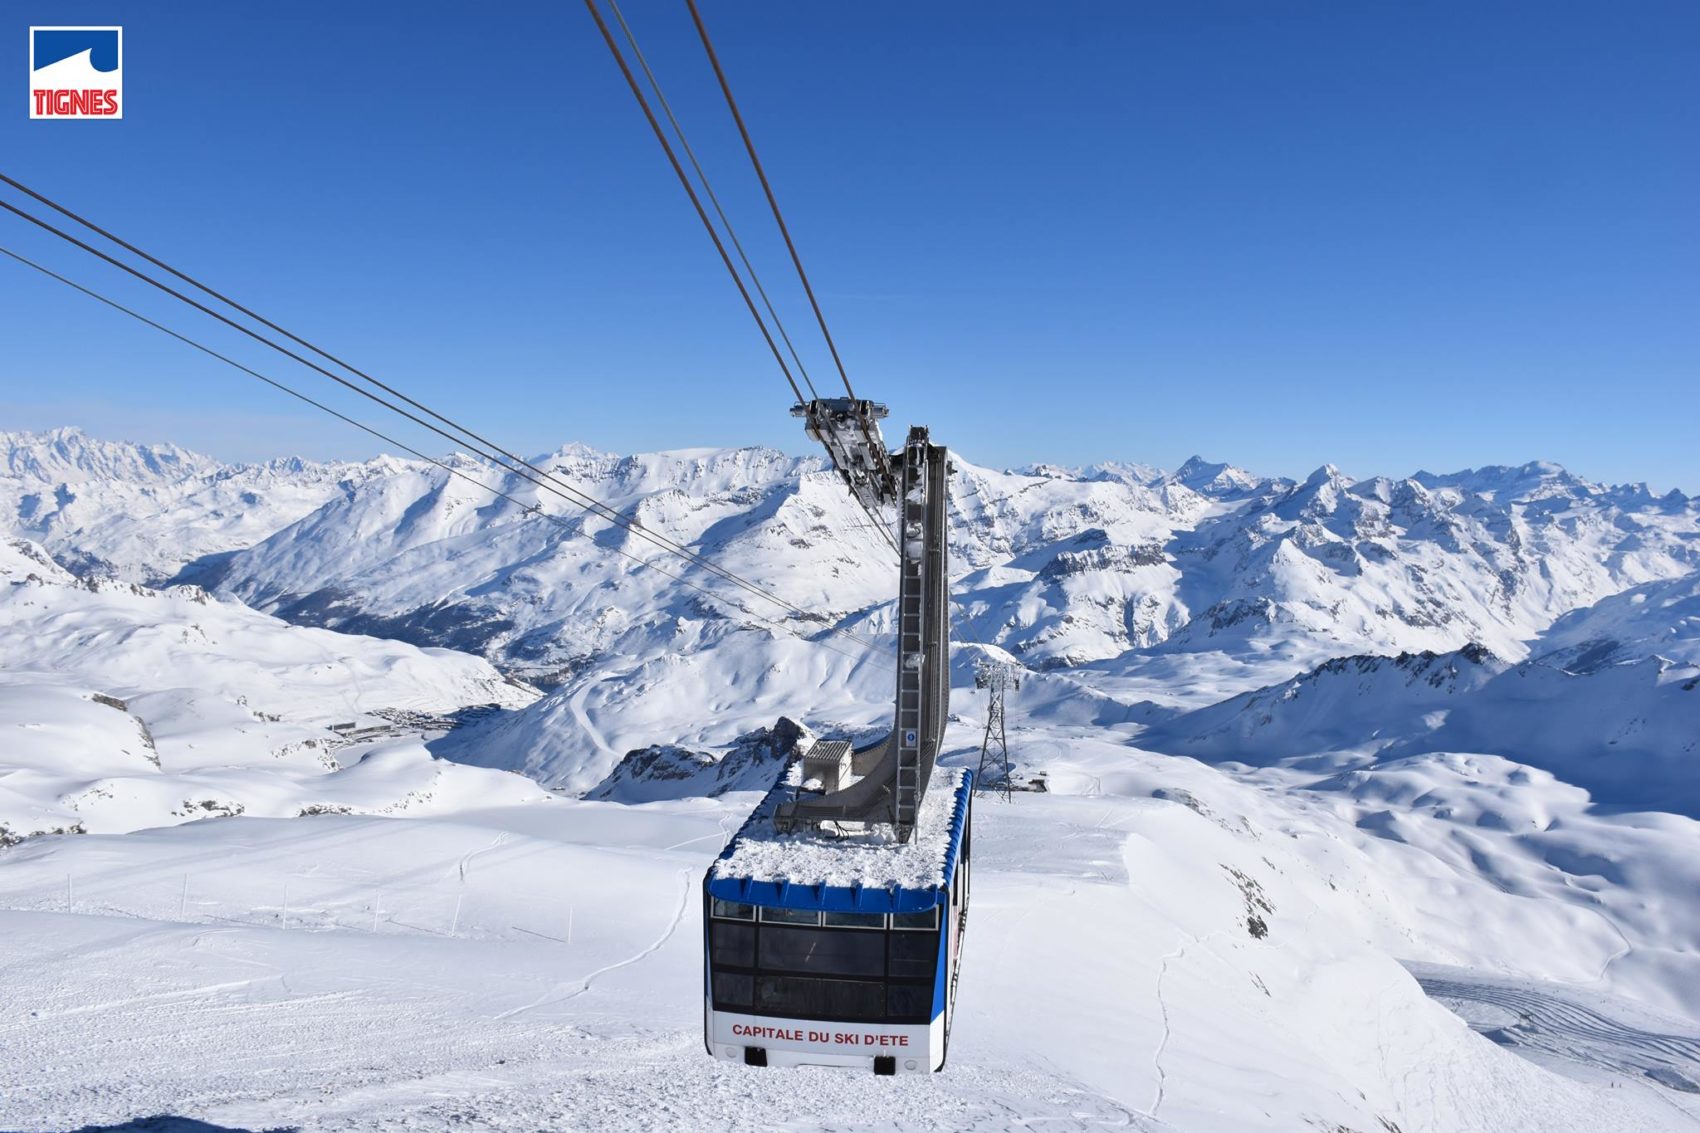 Tignes is opening for the winter season